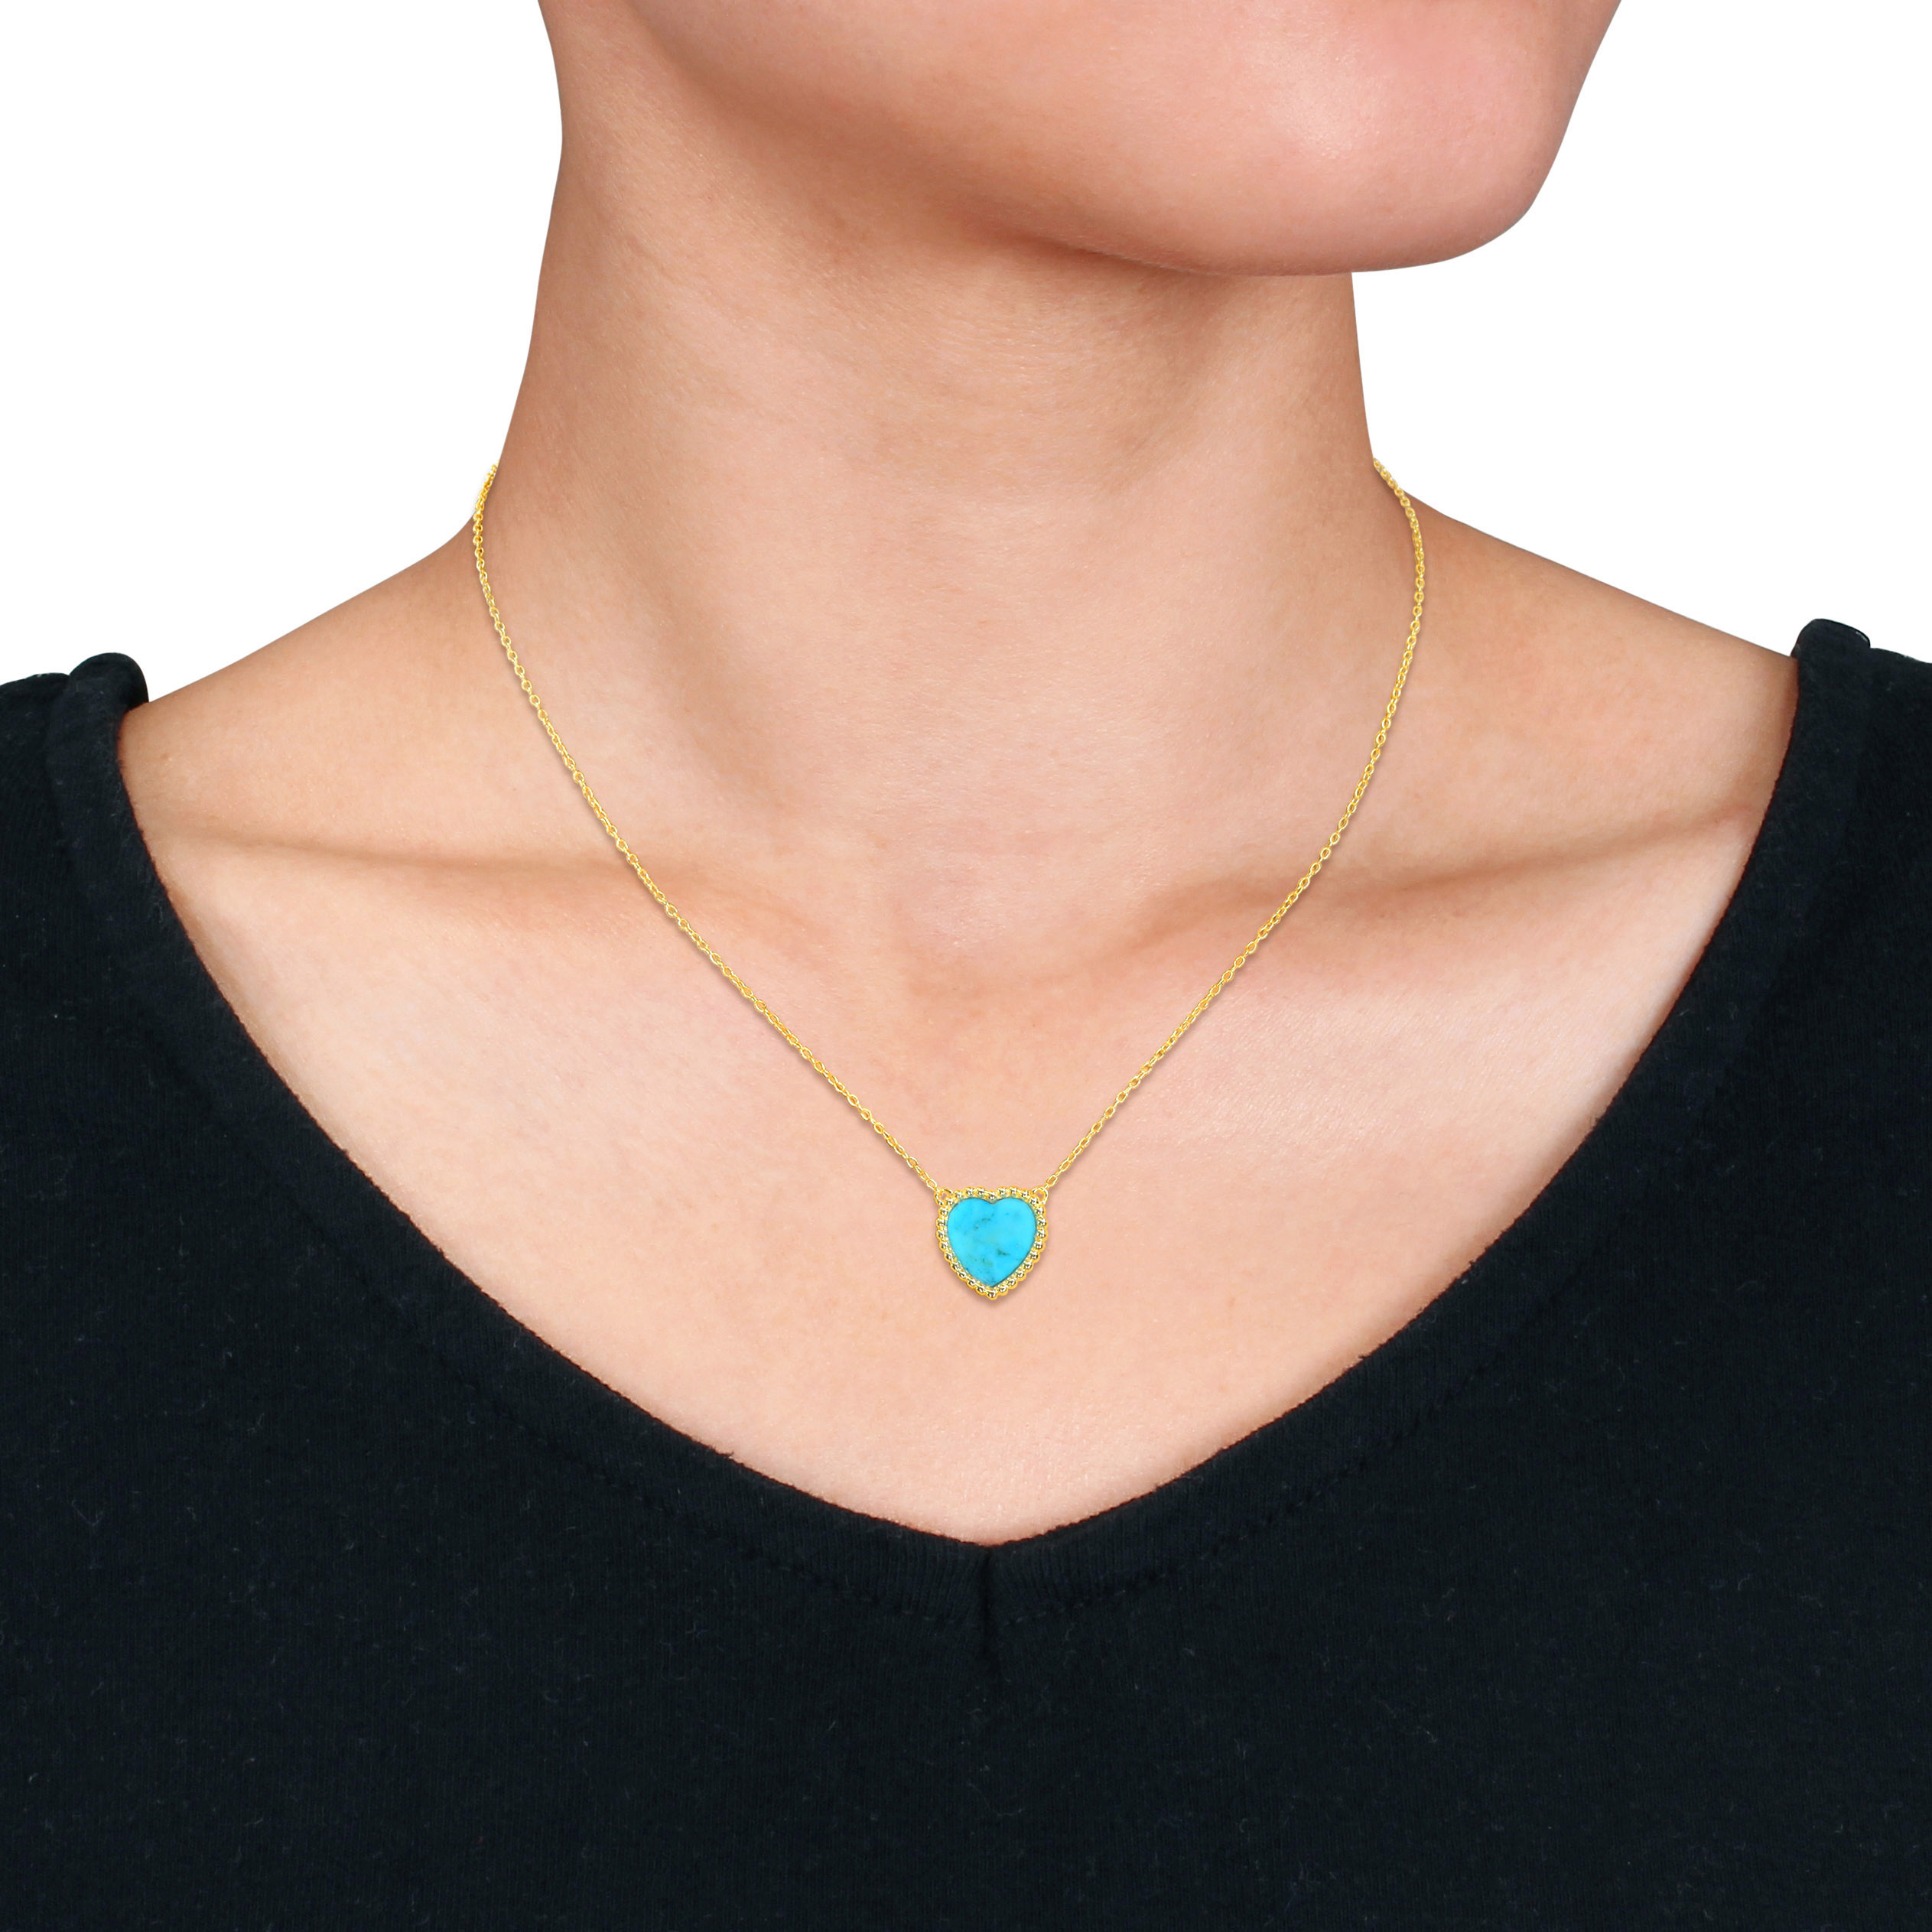 5 CT TGW Heart Shape Created Turquoise Necklace With Beaded Halo in Yellow Plated Sterling Silver - 17 in.